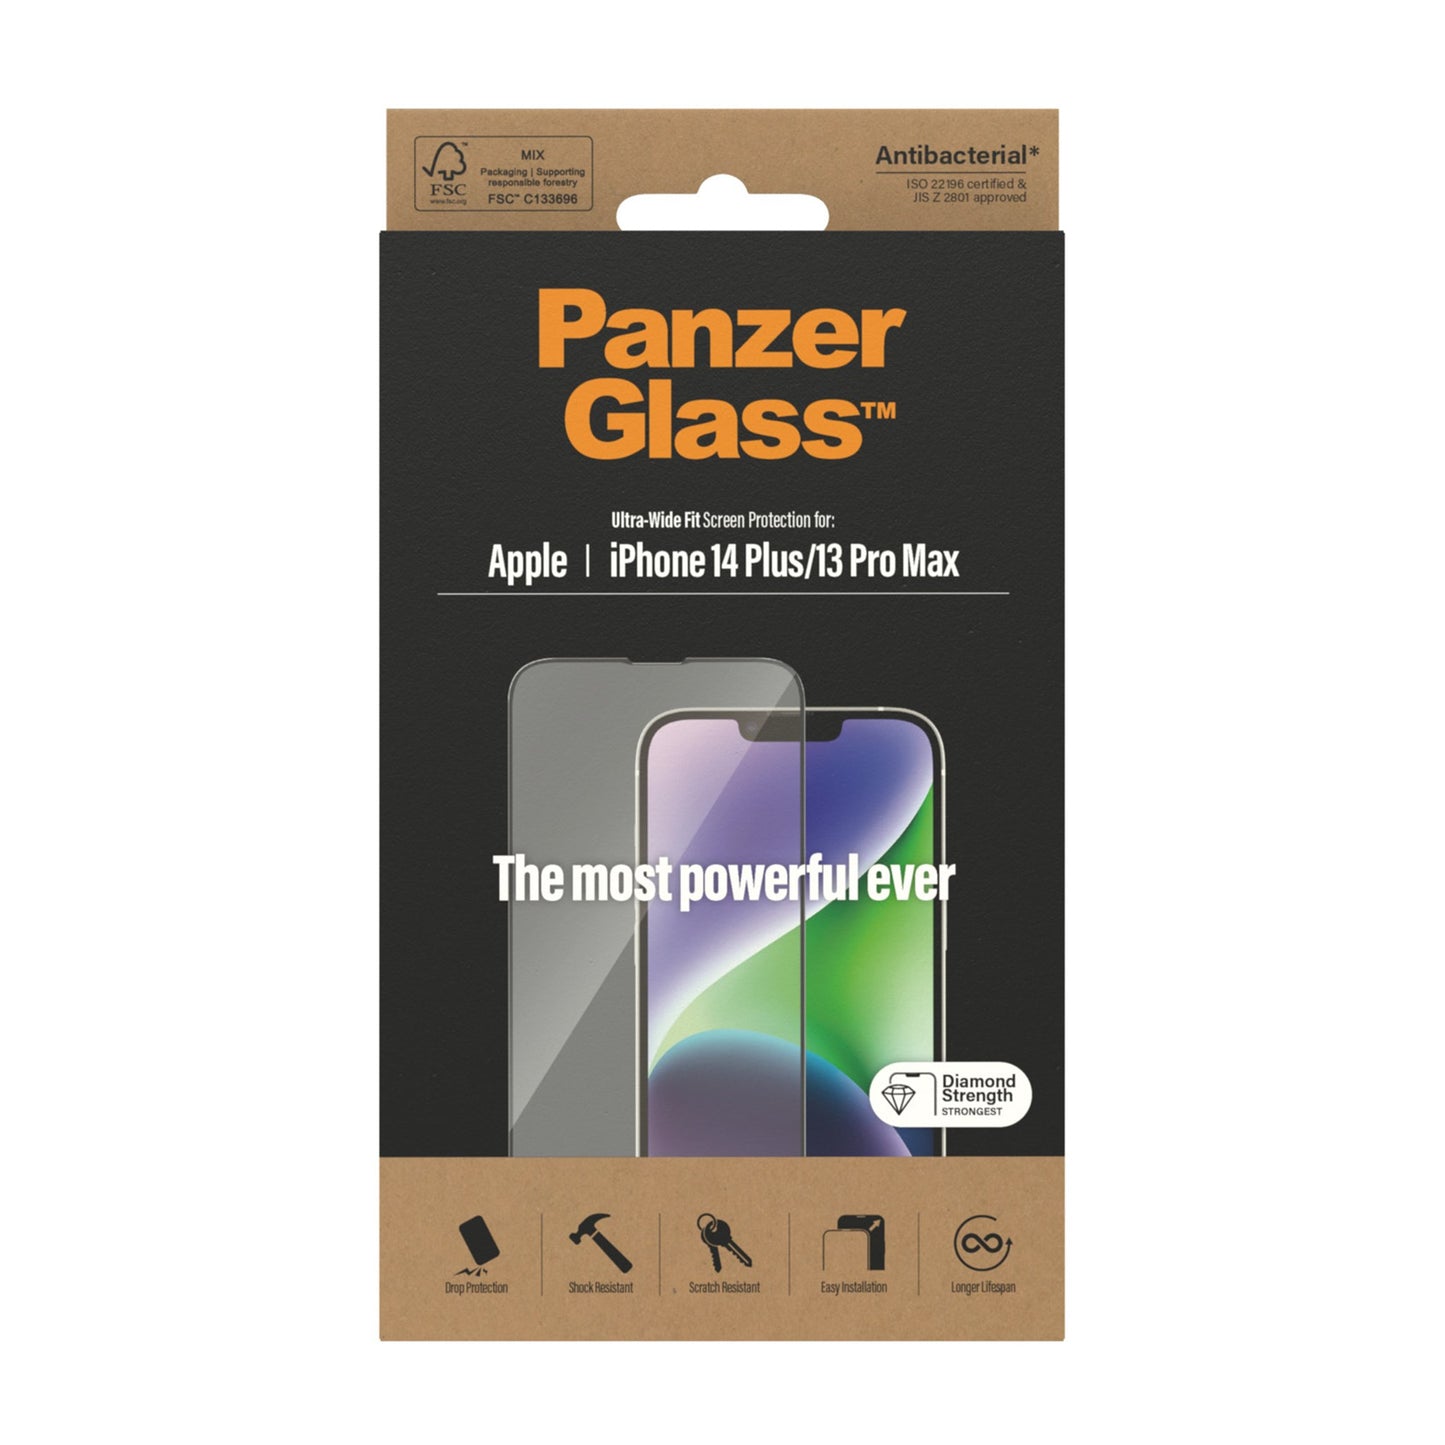 PanzerGlass™ Screen Protector Apple iPhone 14 Plus | 13 Pro Max | Ultra-Wide Fit 3